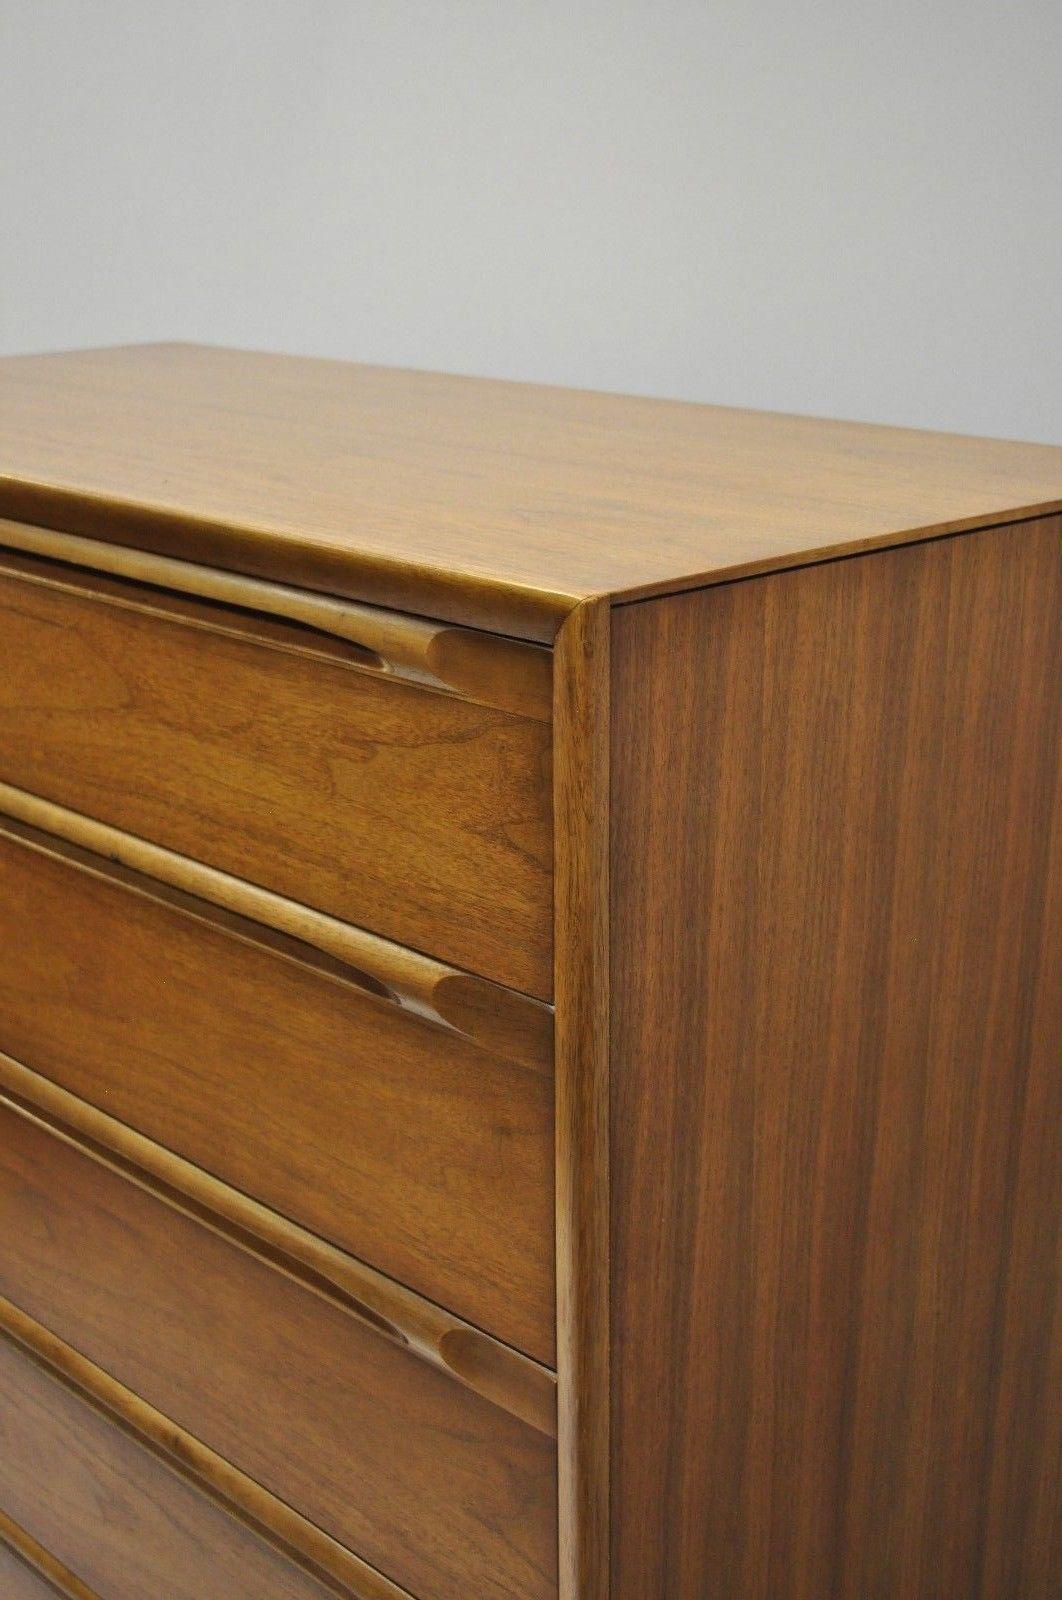 Mid-20th Century Vintage Danish Modern Walnut Tall Chest of Drawers Dresser Sculpted Pull